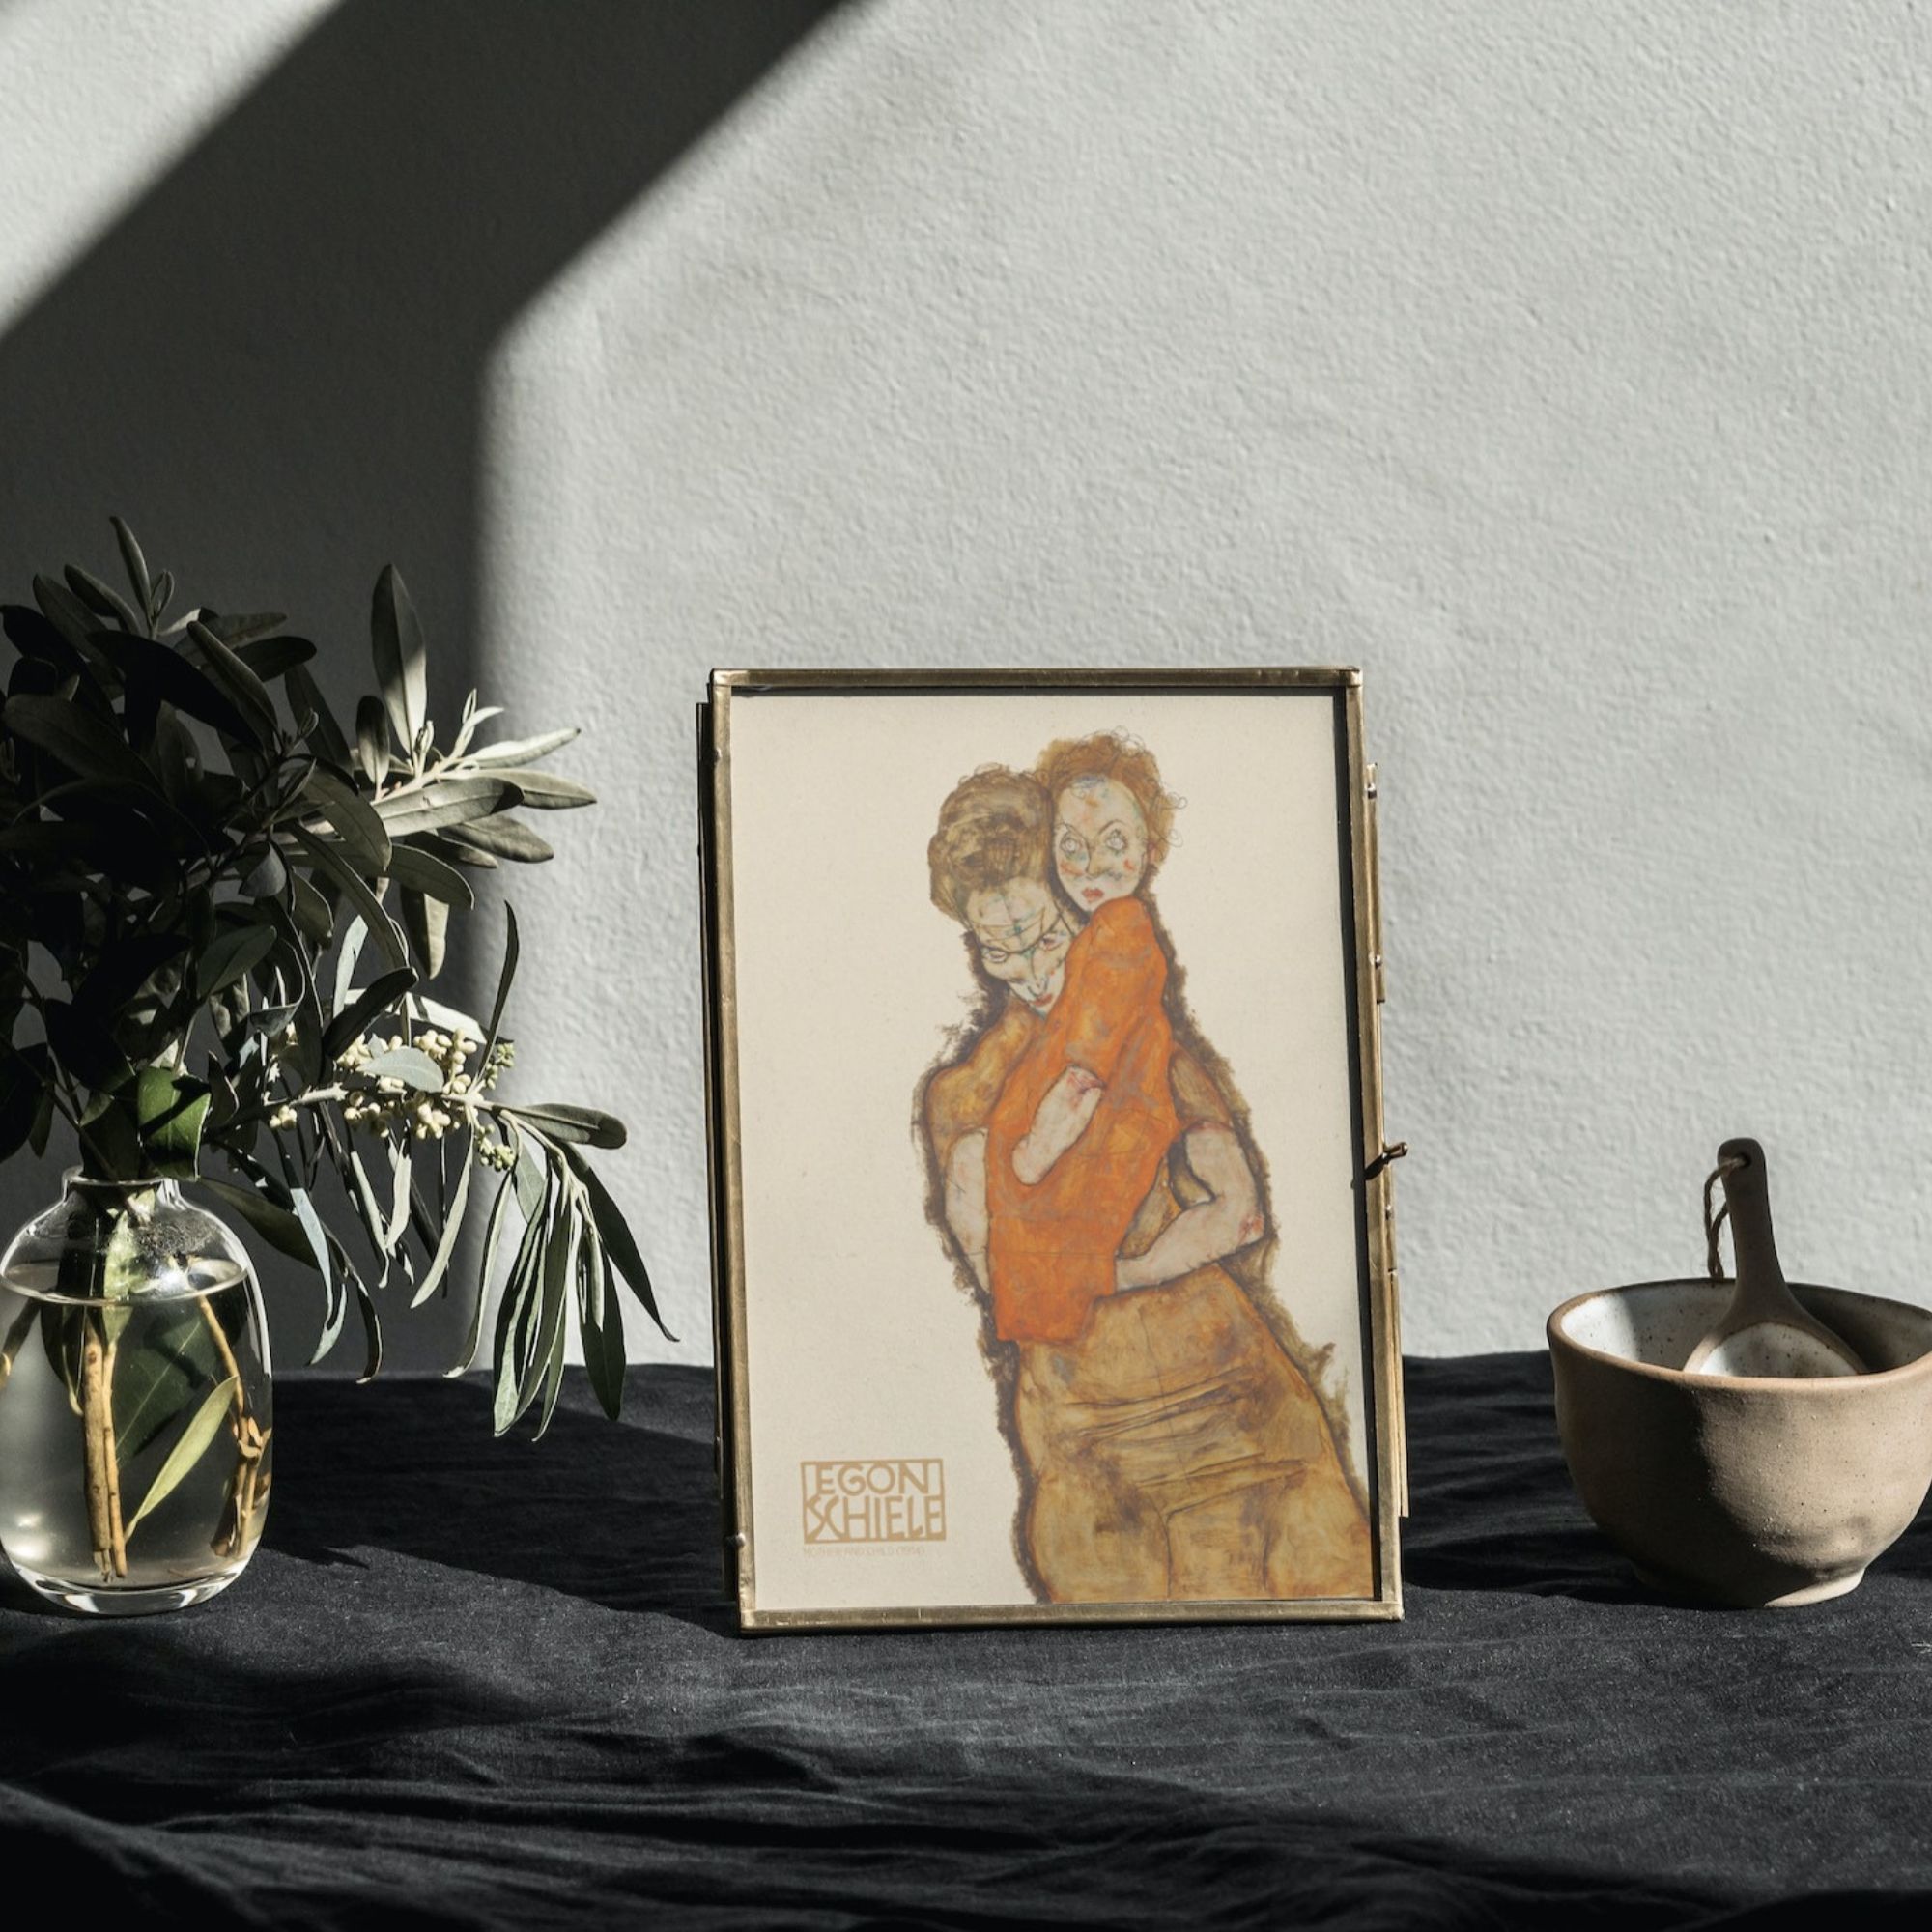 Egon Schiele 1914 Poster - 'Mother and Child' Artistic Representation with Warm Earth Tones and Intense Emotional Expression